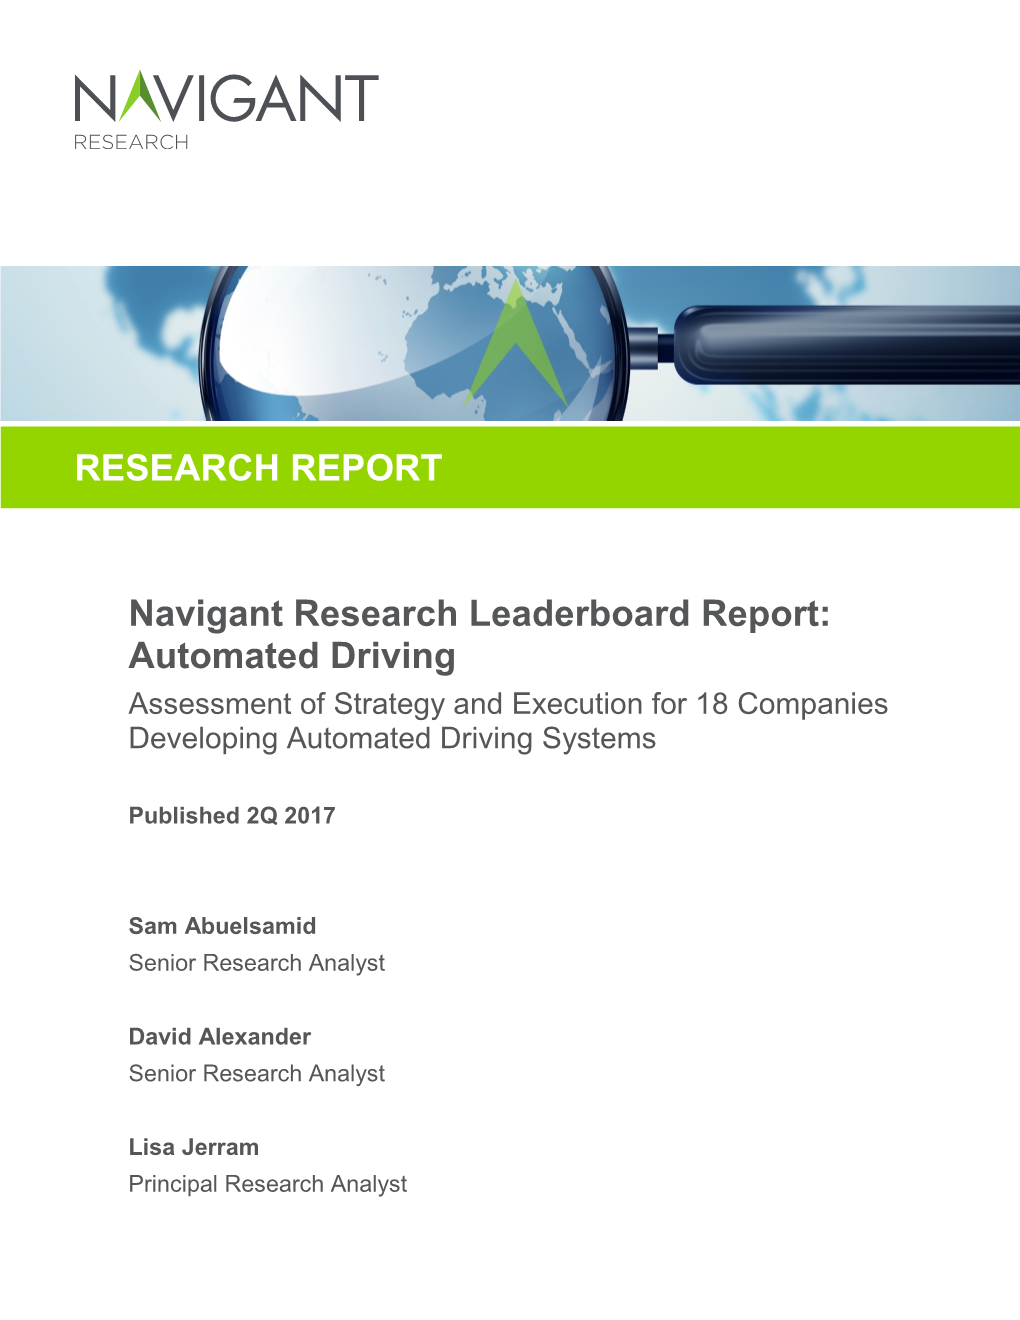 Navigant Research Leaderboard Report: Automated Driving Assessment of Strategy and Execution for 18 Companies Developing Automated Driving Systems